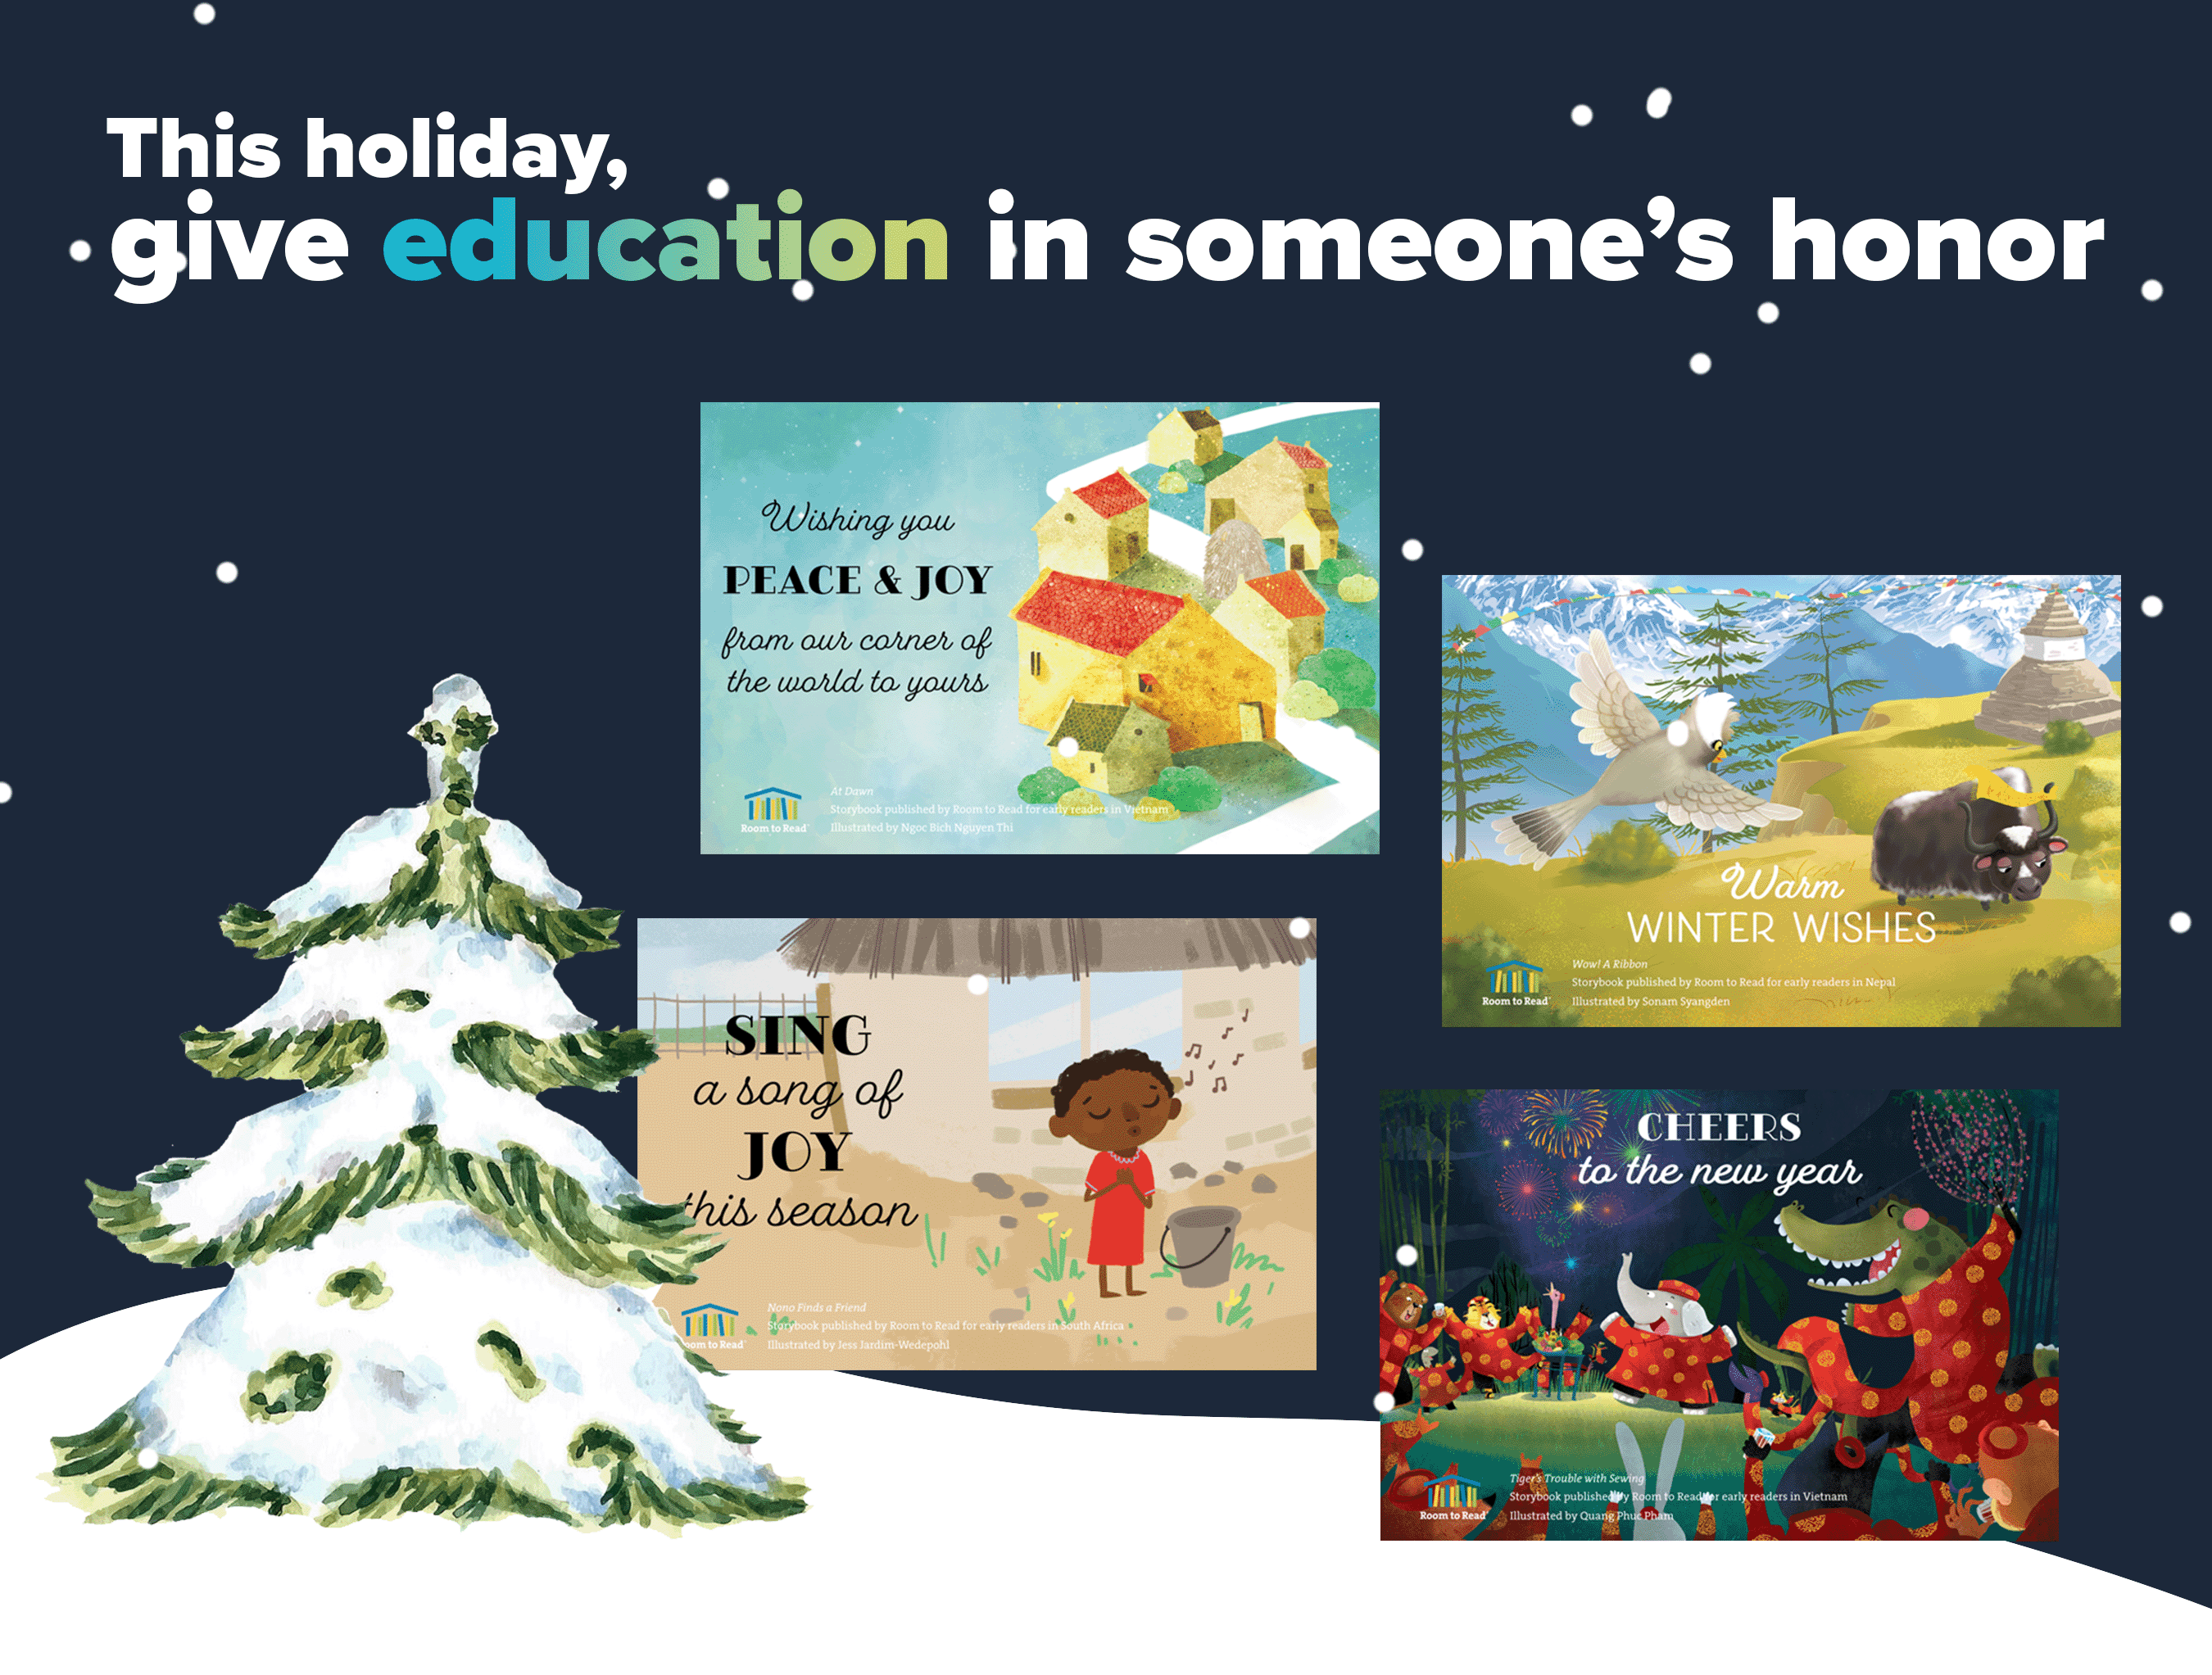 This holiday, give education in someone's honor.